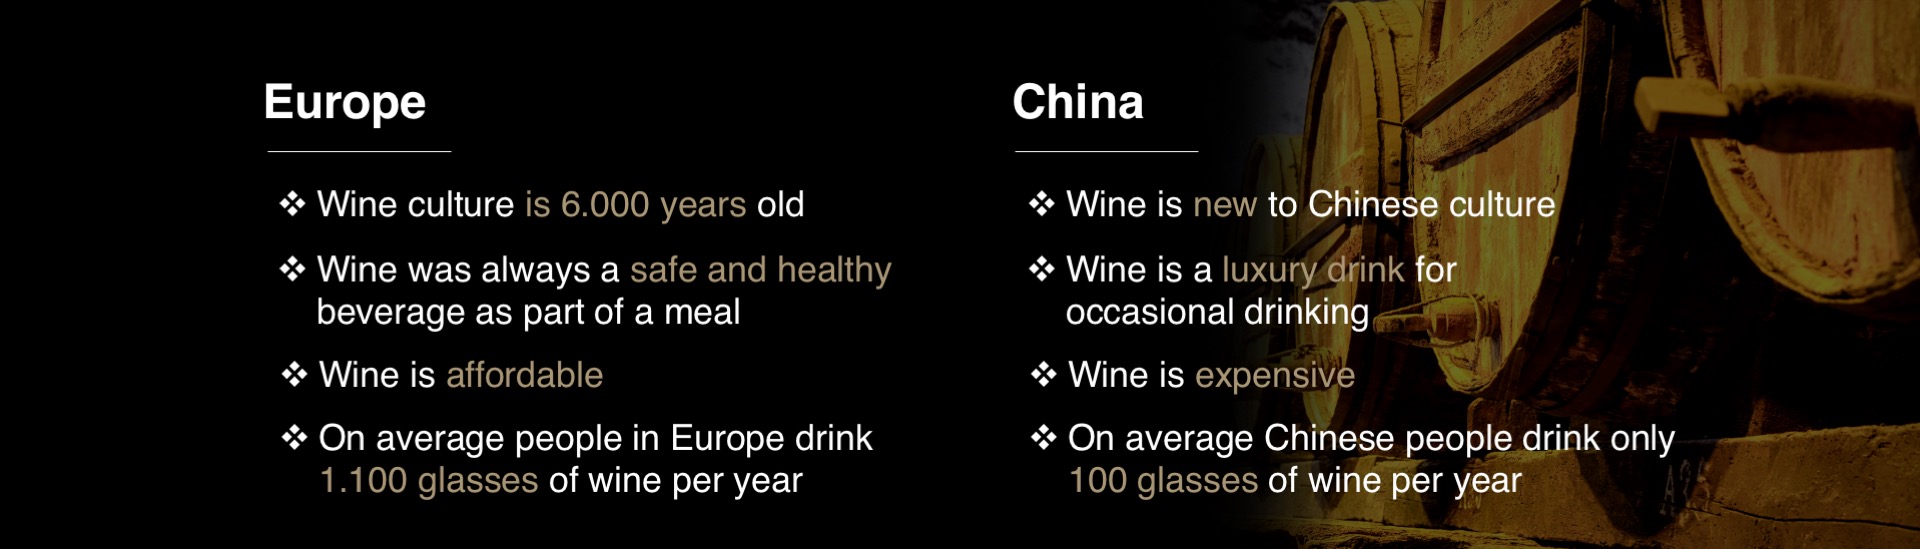  HOW WE BUILD A WINEBRAND         IN CHINA